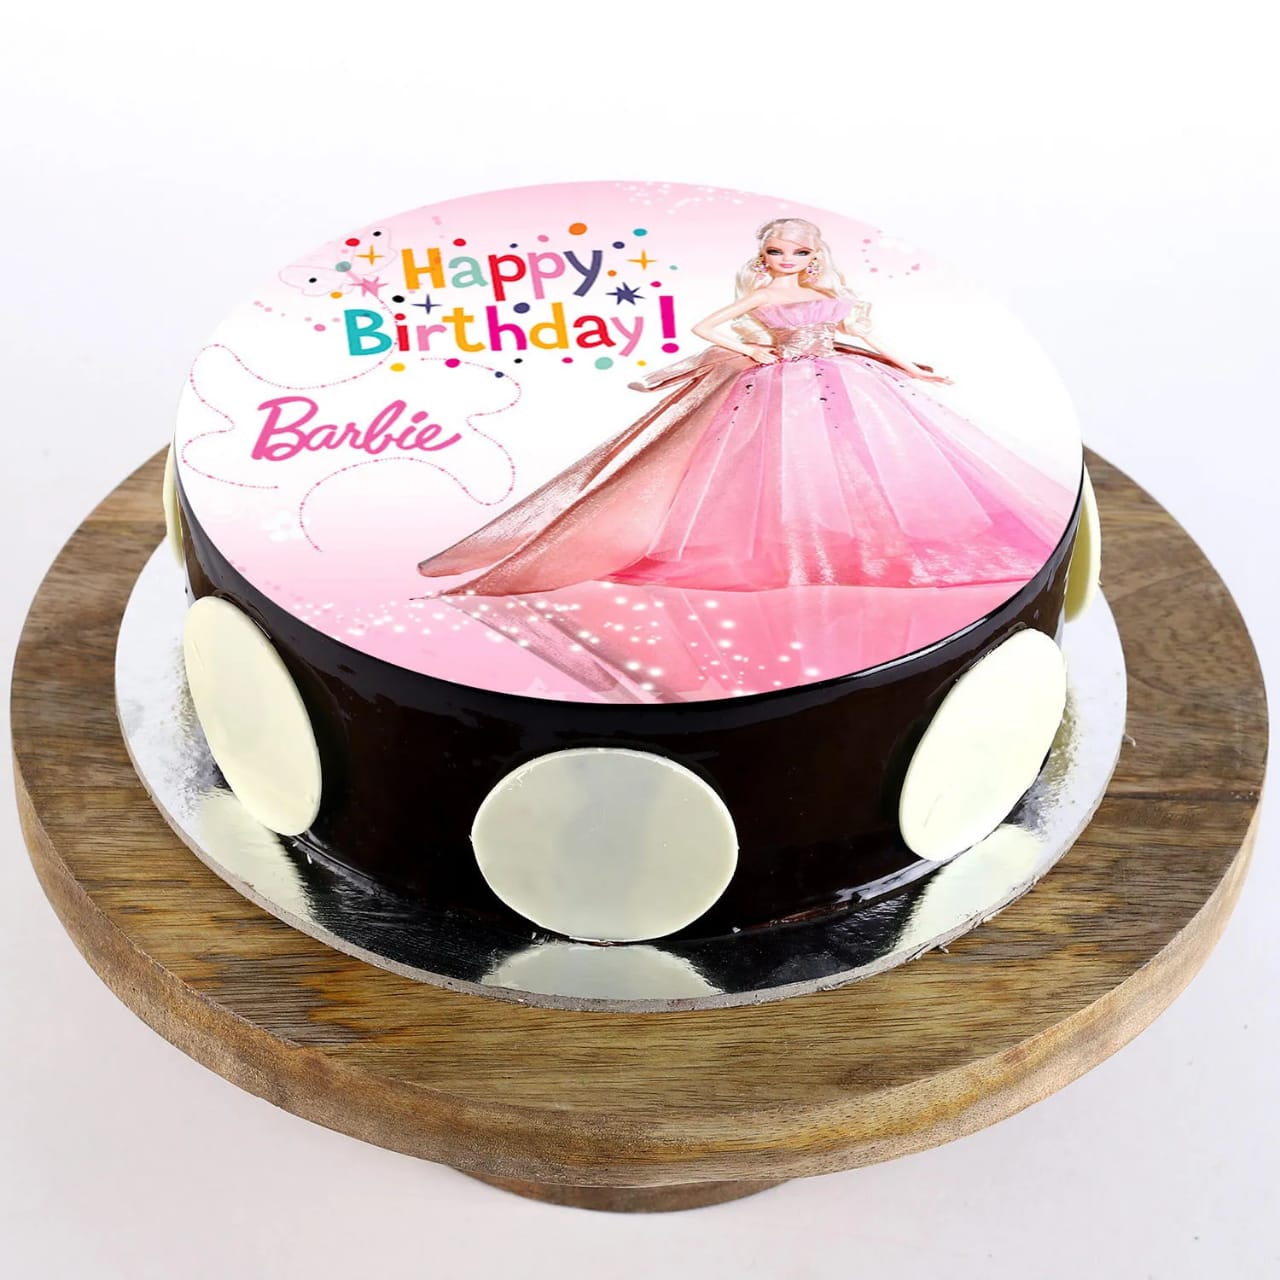 The Blue Fashioned Barbie Cake | Order Online at Bakers Fun